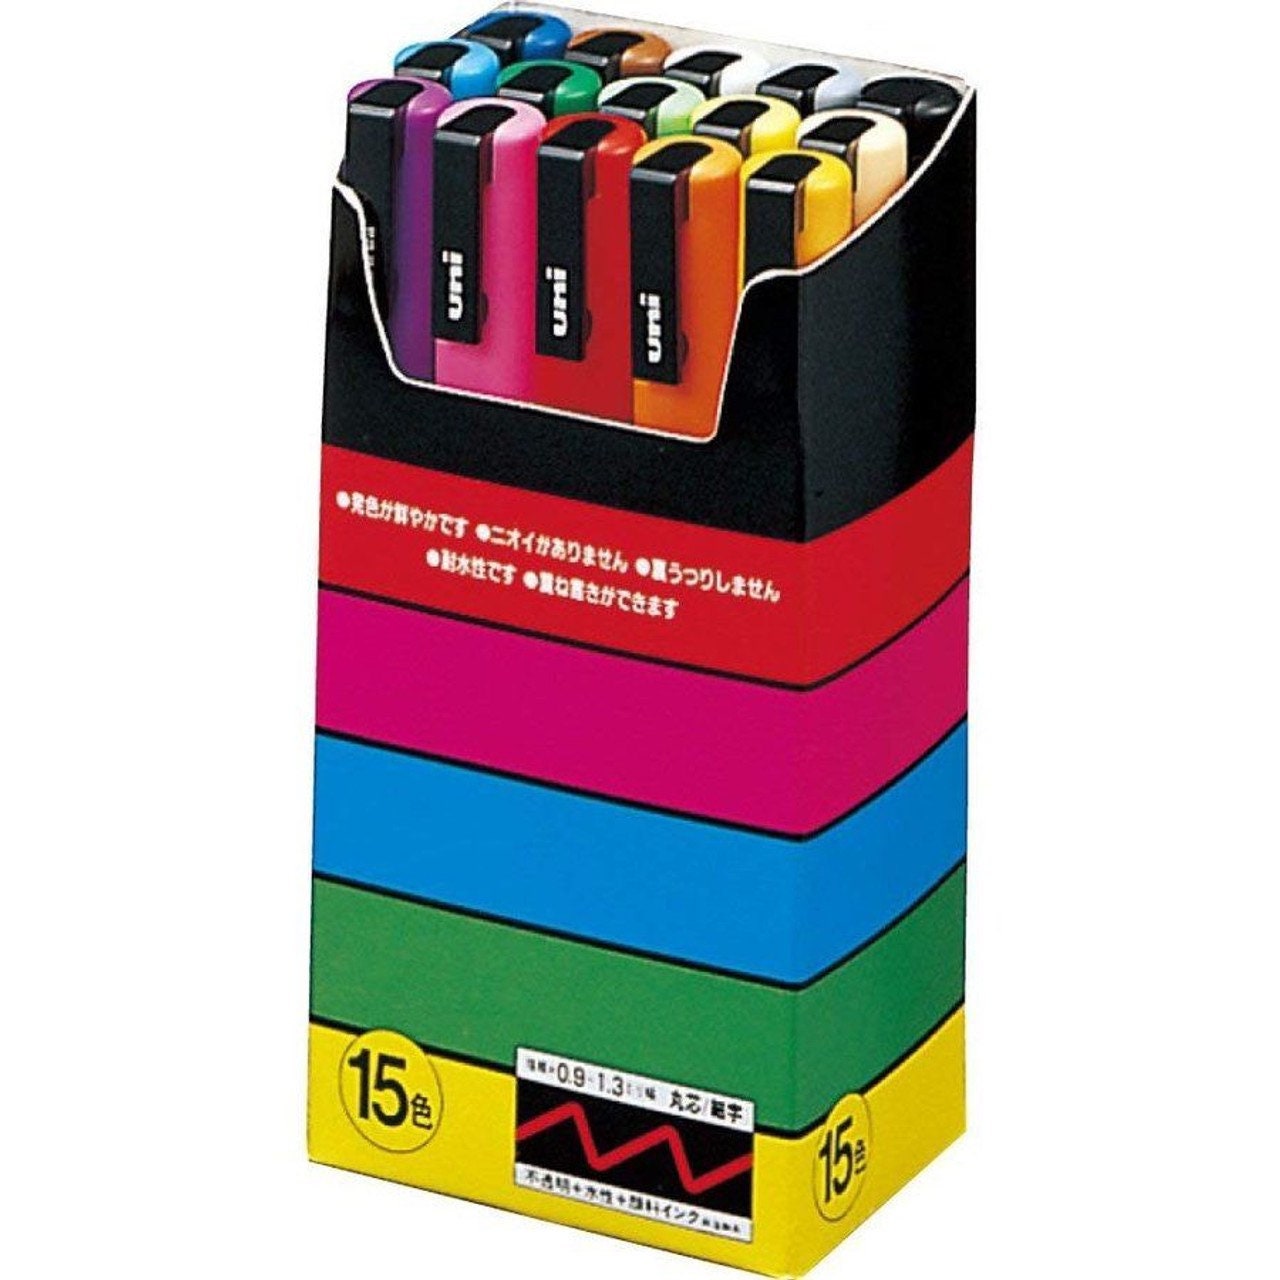 Uni POSCA Marker Pen PC-7M Broad Collection Box of 15 Assorted NEW